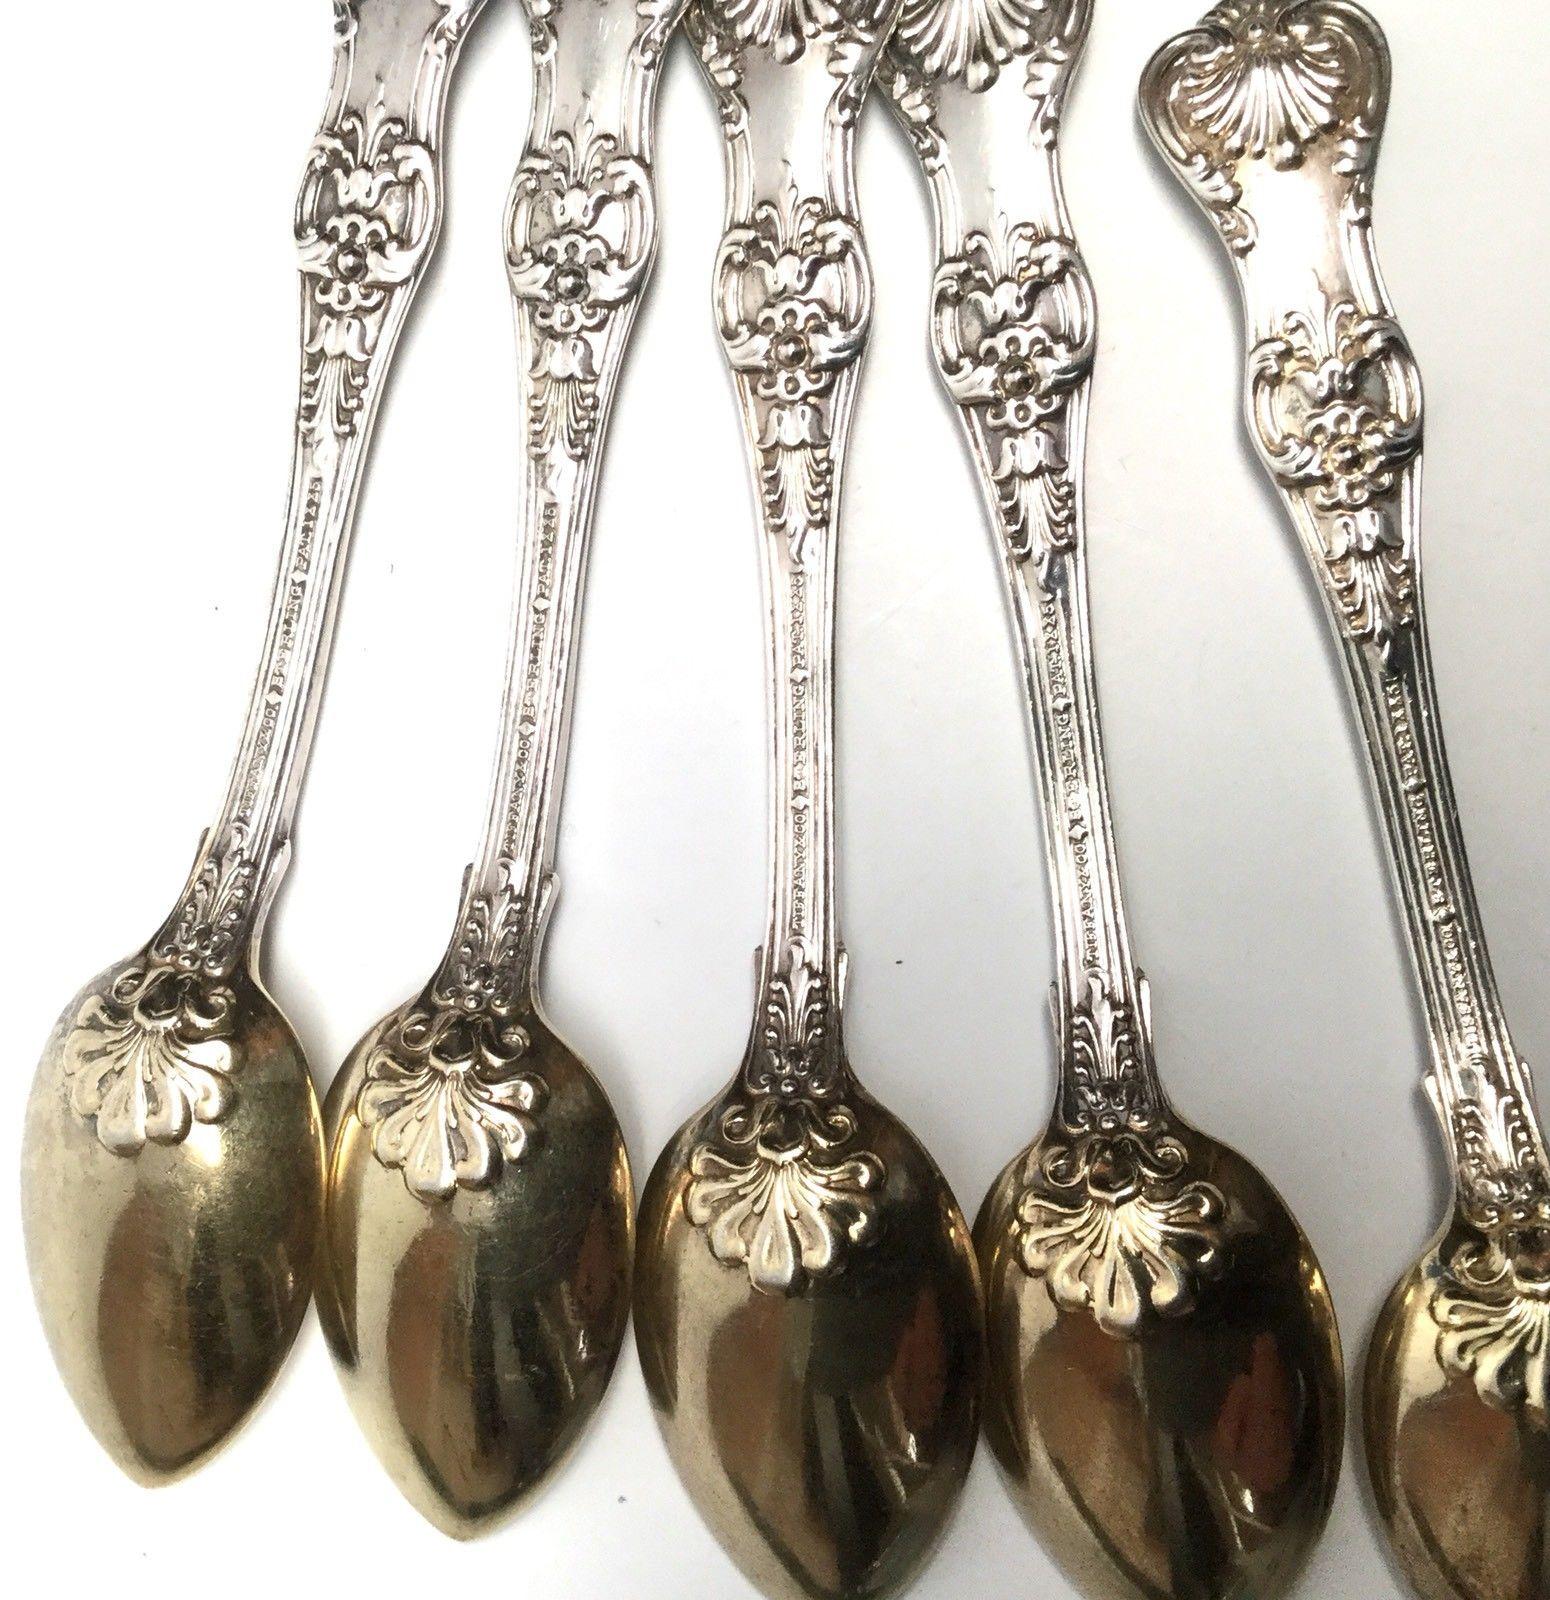 Tiffany & Co English King Pattern 1885 Sterling Silver Set of 5 Demitasse Spoons 2